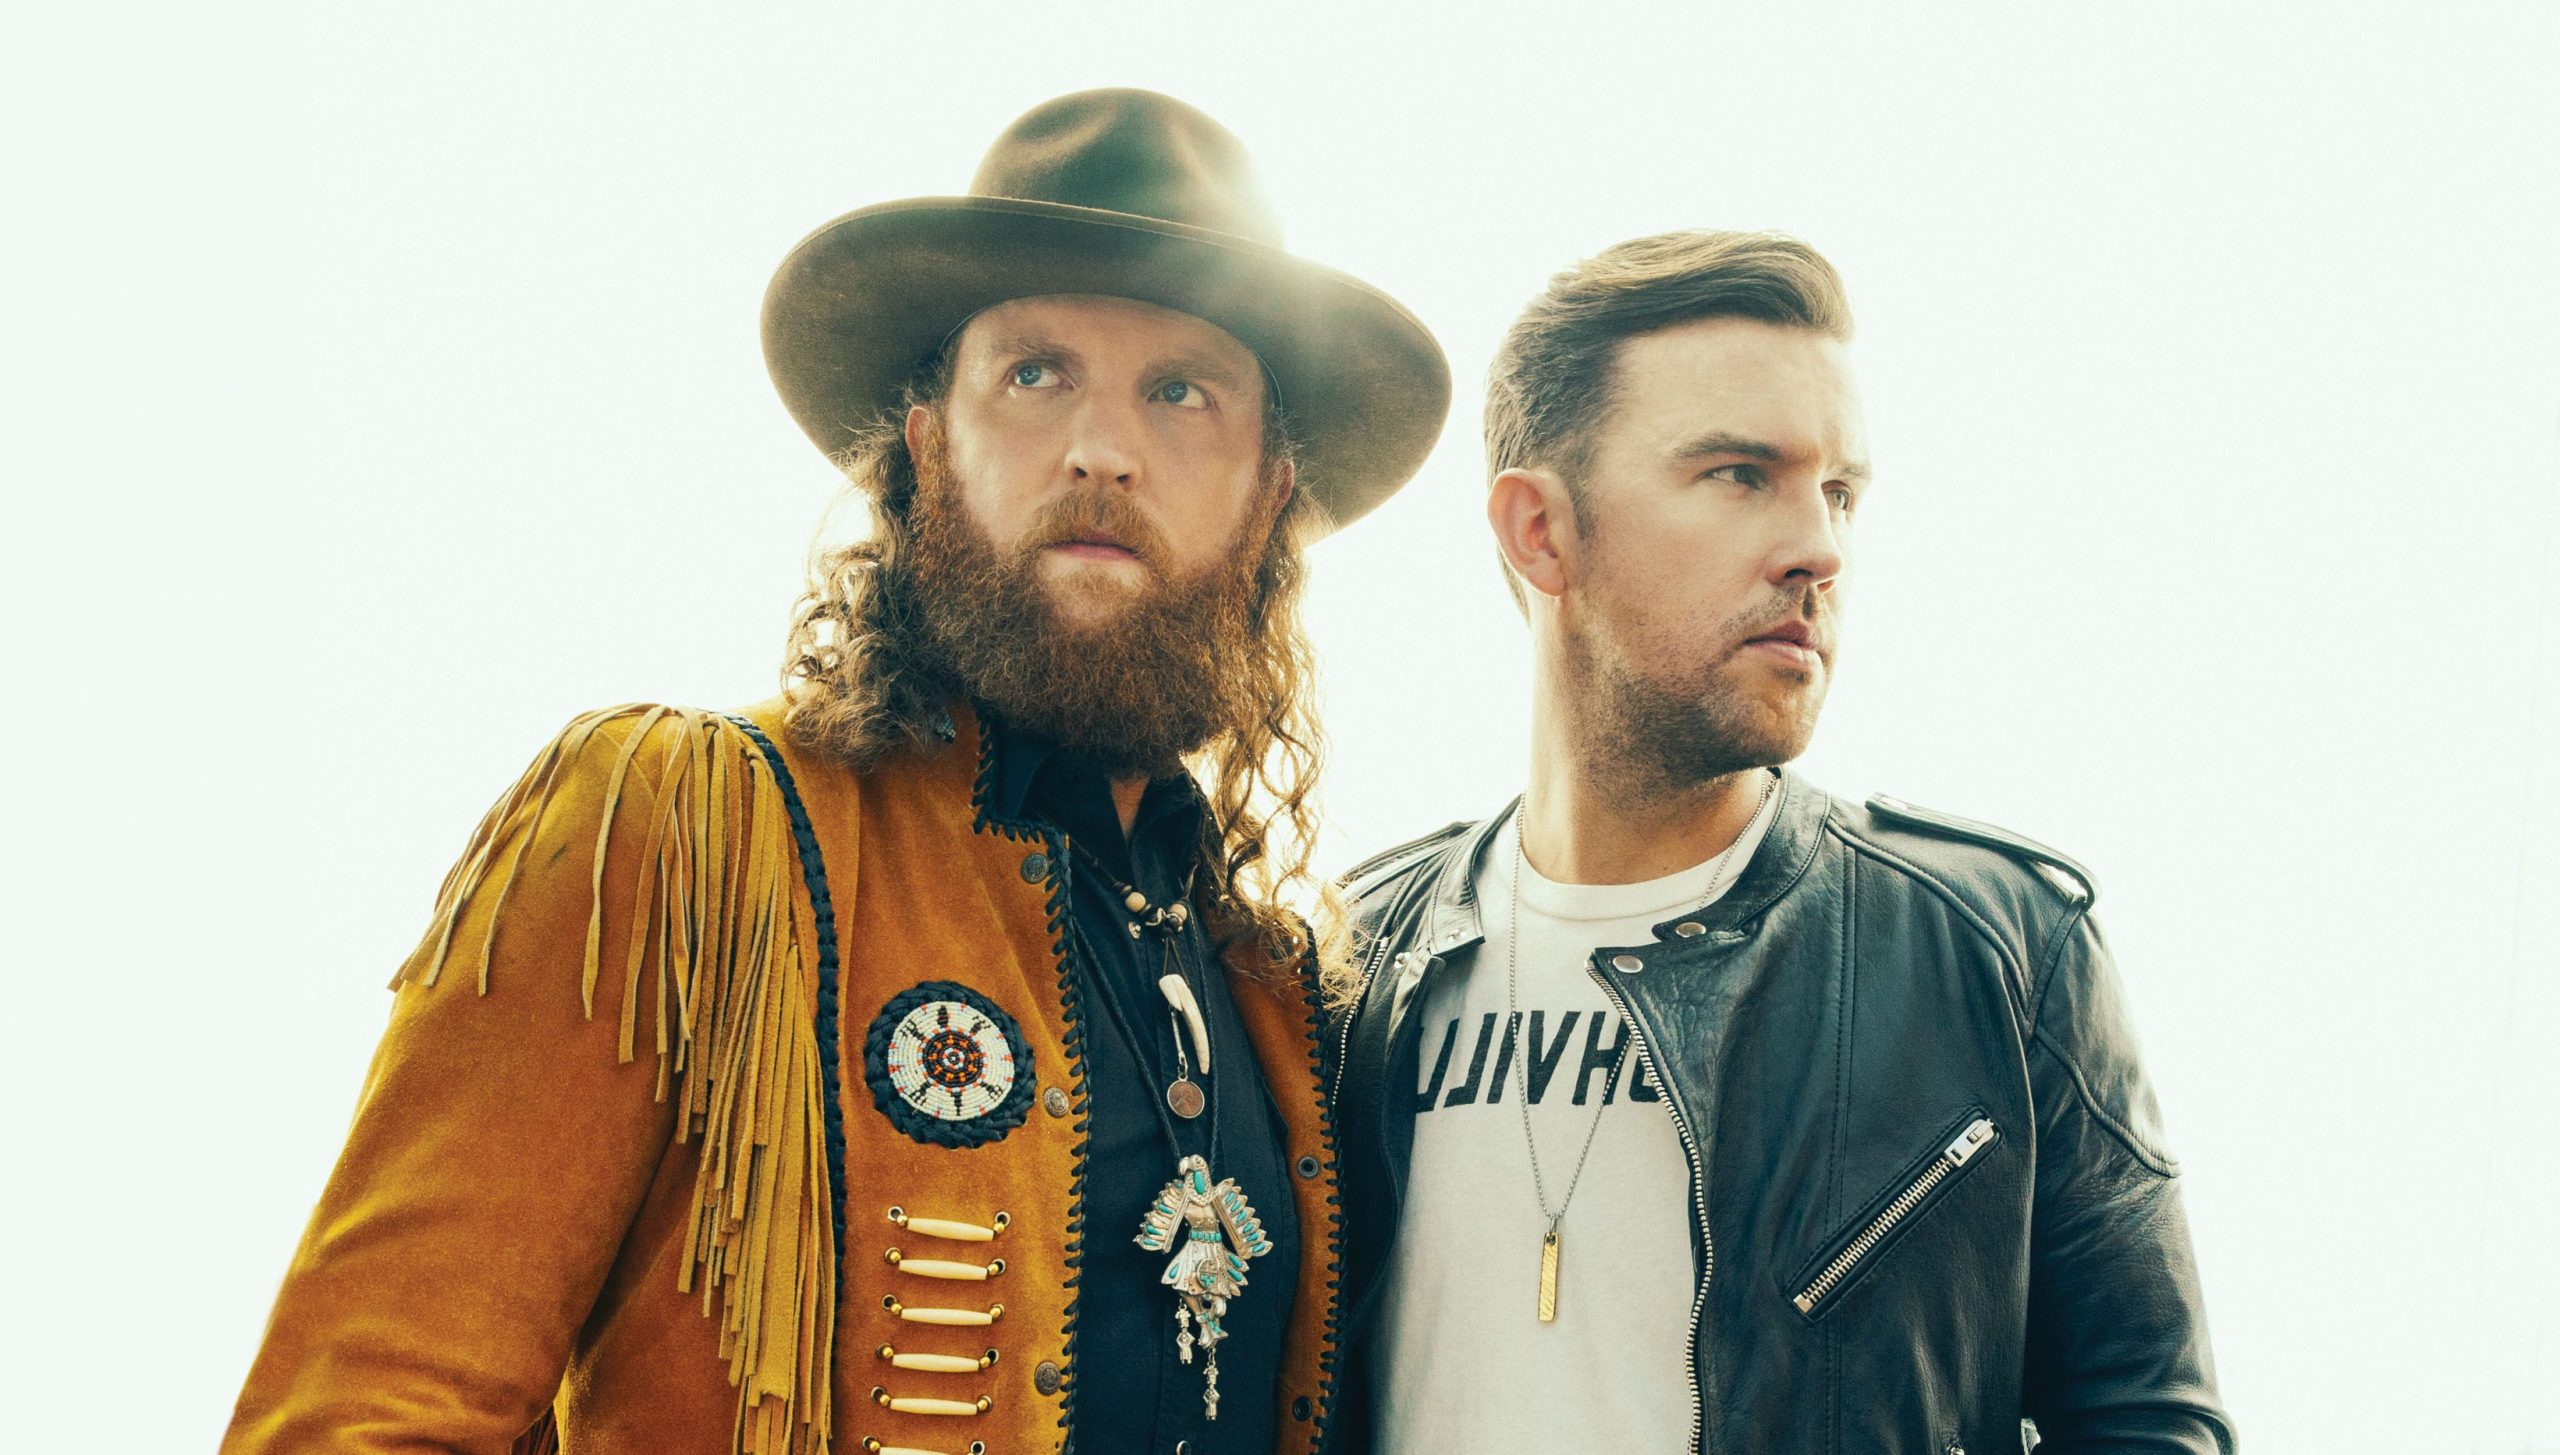 BROTHERS OSBORNE WRAPS EXHILARATING WEEK WITH BACK-TO-BACK SOLD OUT SHOWS